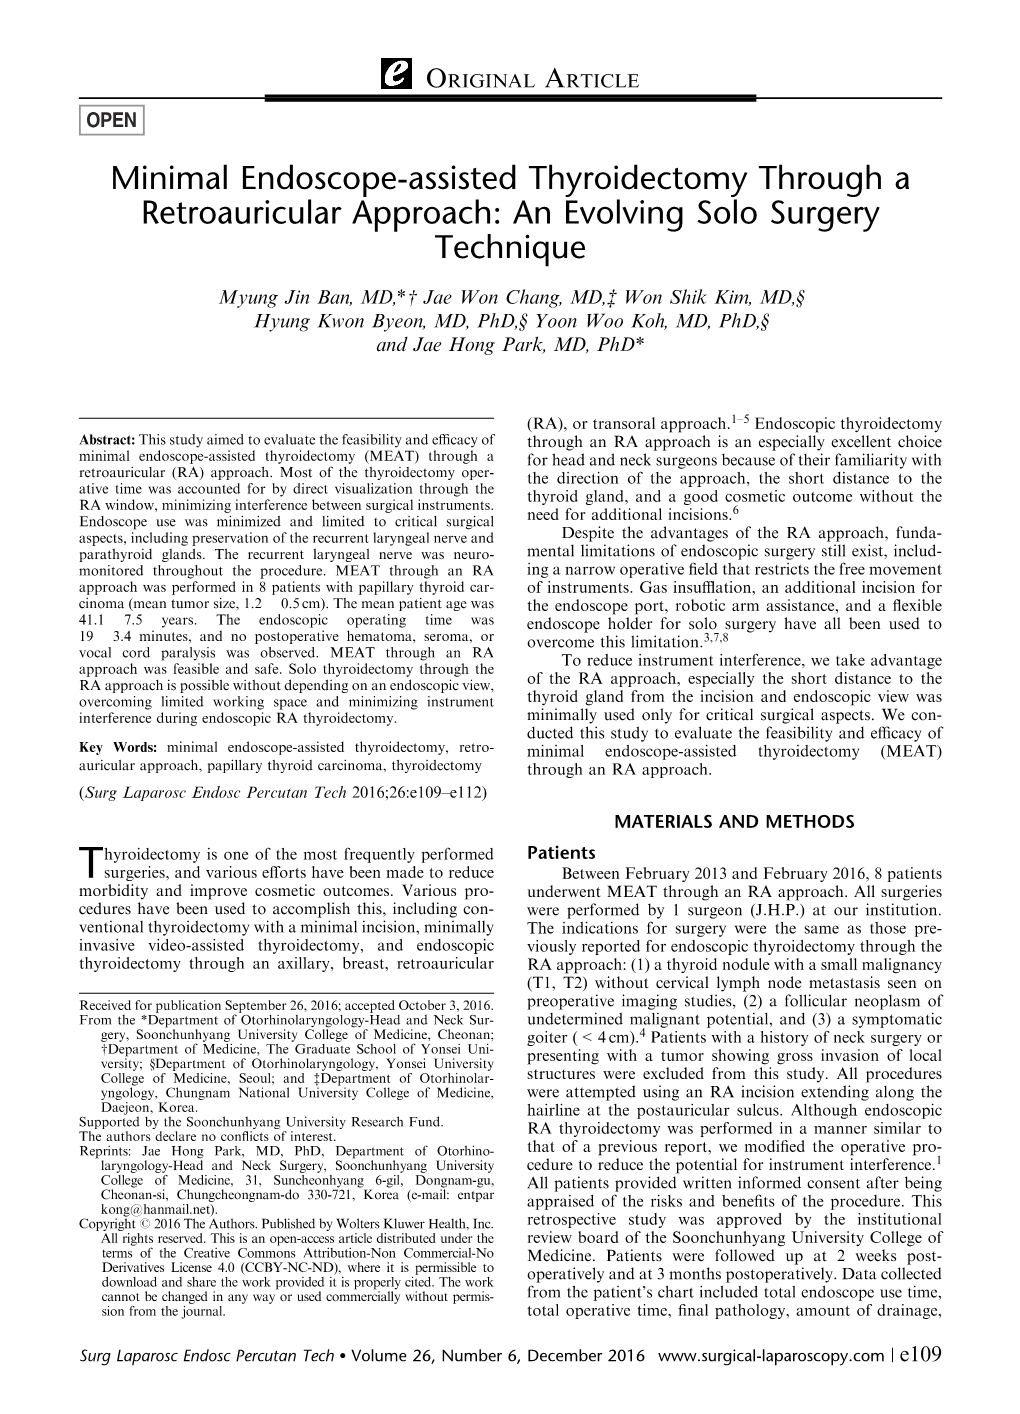 Minimal Endoscope-Assisted Thyroidectomy Through a Retroauricular Approach: an Evolving Solo Surgery Technique